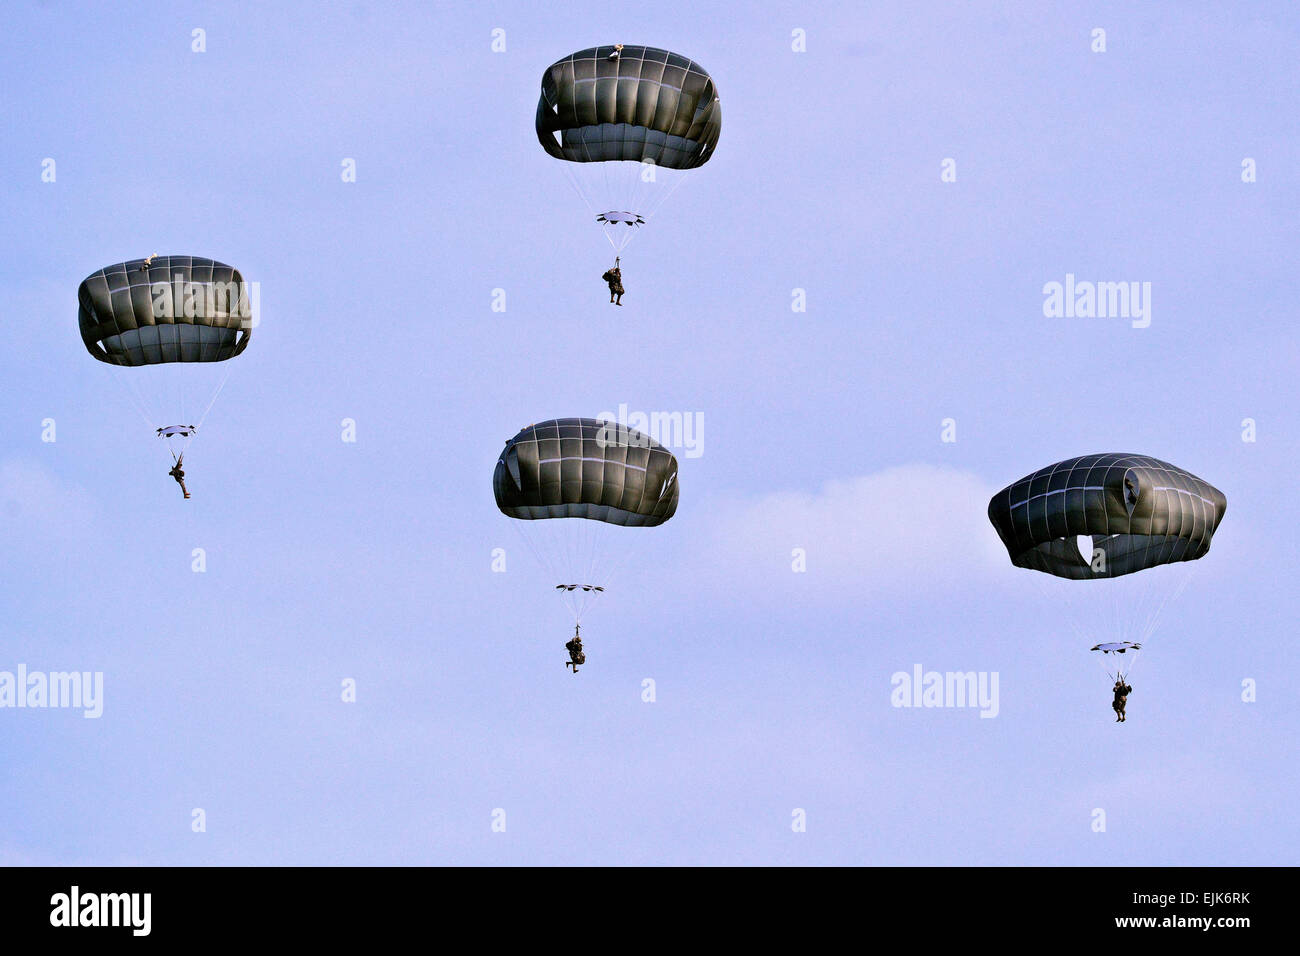 U.S. Army Soldiers, assigned to 173rd Infantry Brigade Combat Team Airborne, conduct a combat training jump with T-11 parachutes from a C-130 Hercules at the 7th Army Joint Multinational Training Command's Grafenwoehr Training Area, Germany, Oct. 22, 2013. U.S. Army  Visual Information Specialist Gertrud Zach Stock Photo